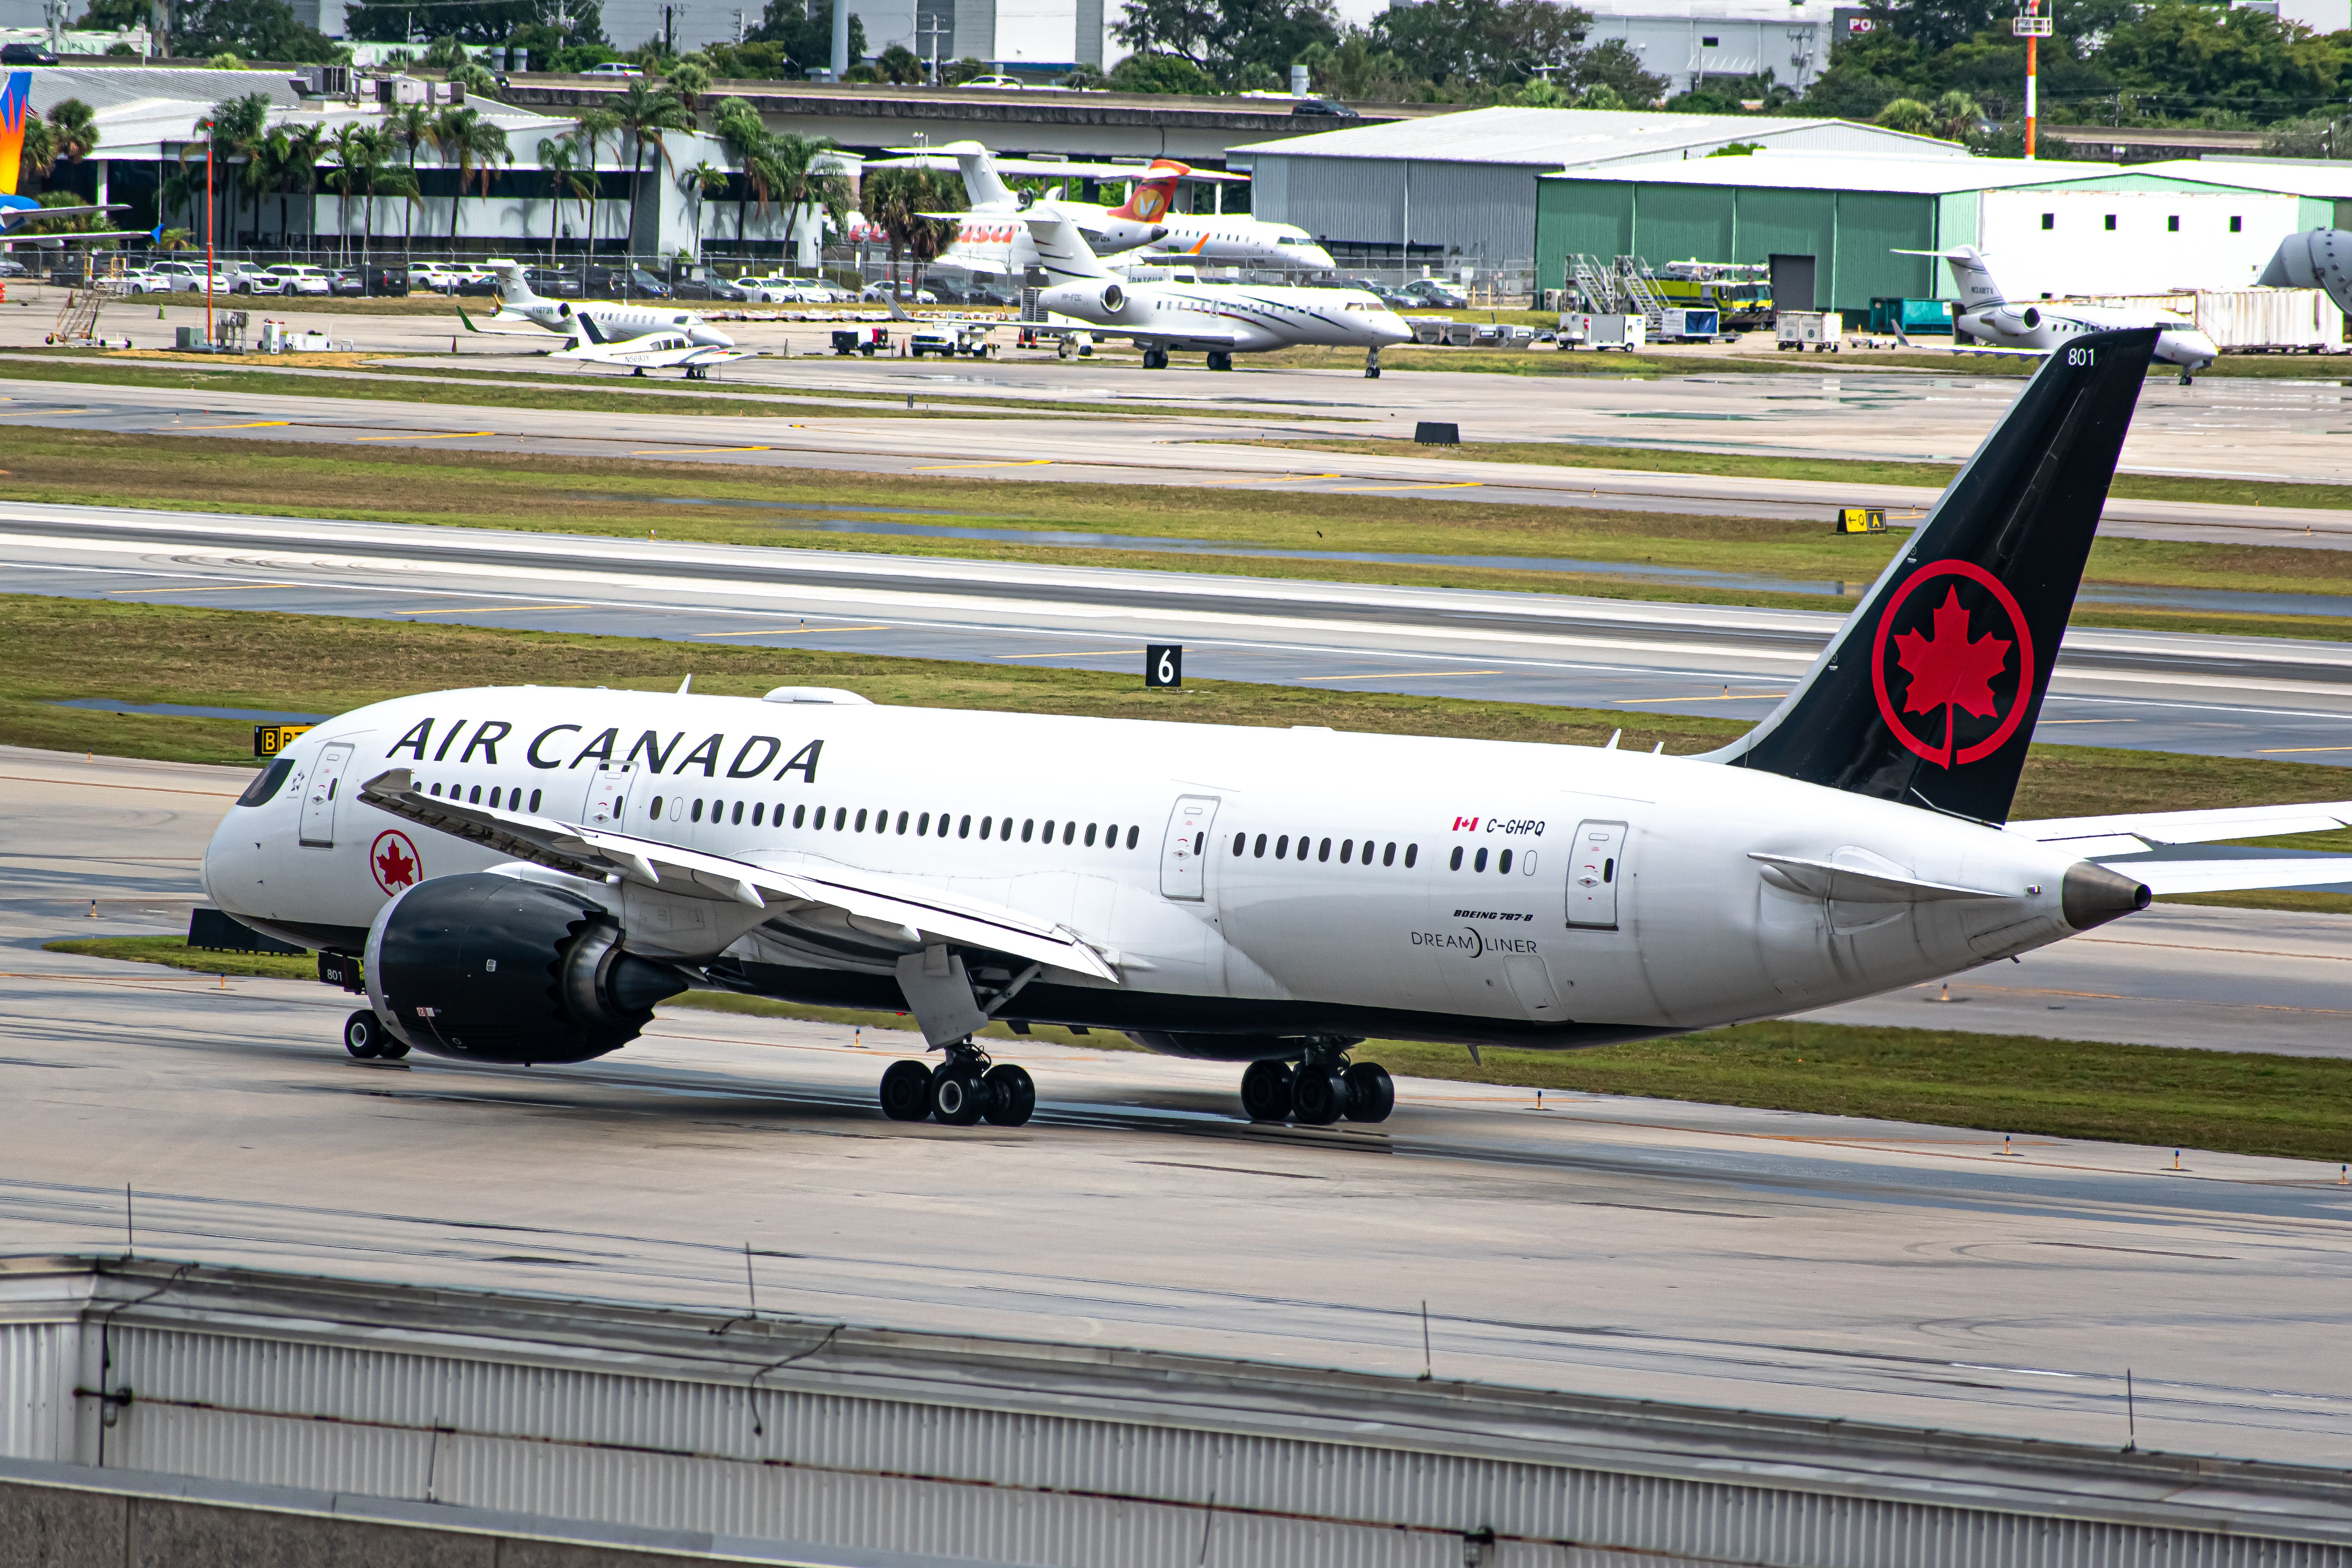  Air Canada Boeing 787-8 taxiing at FLL